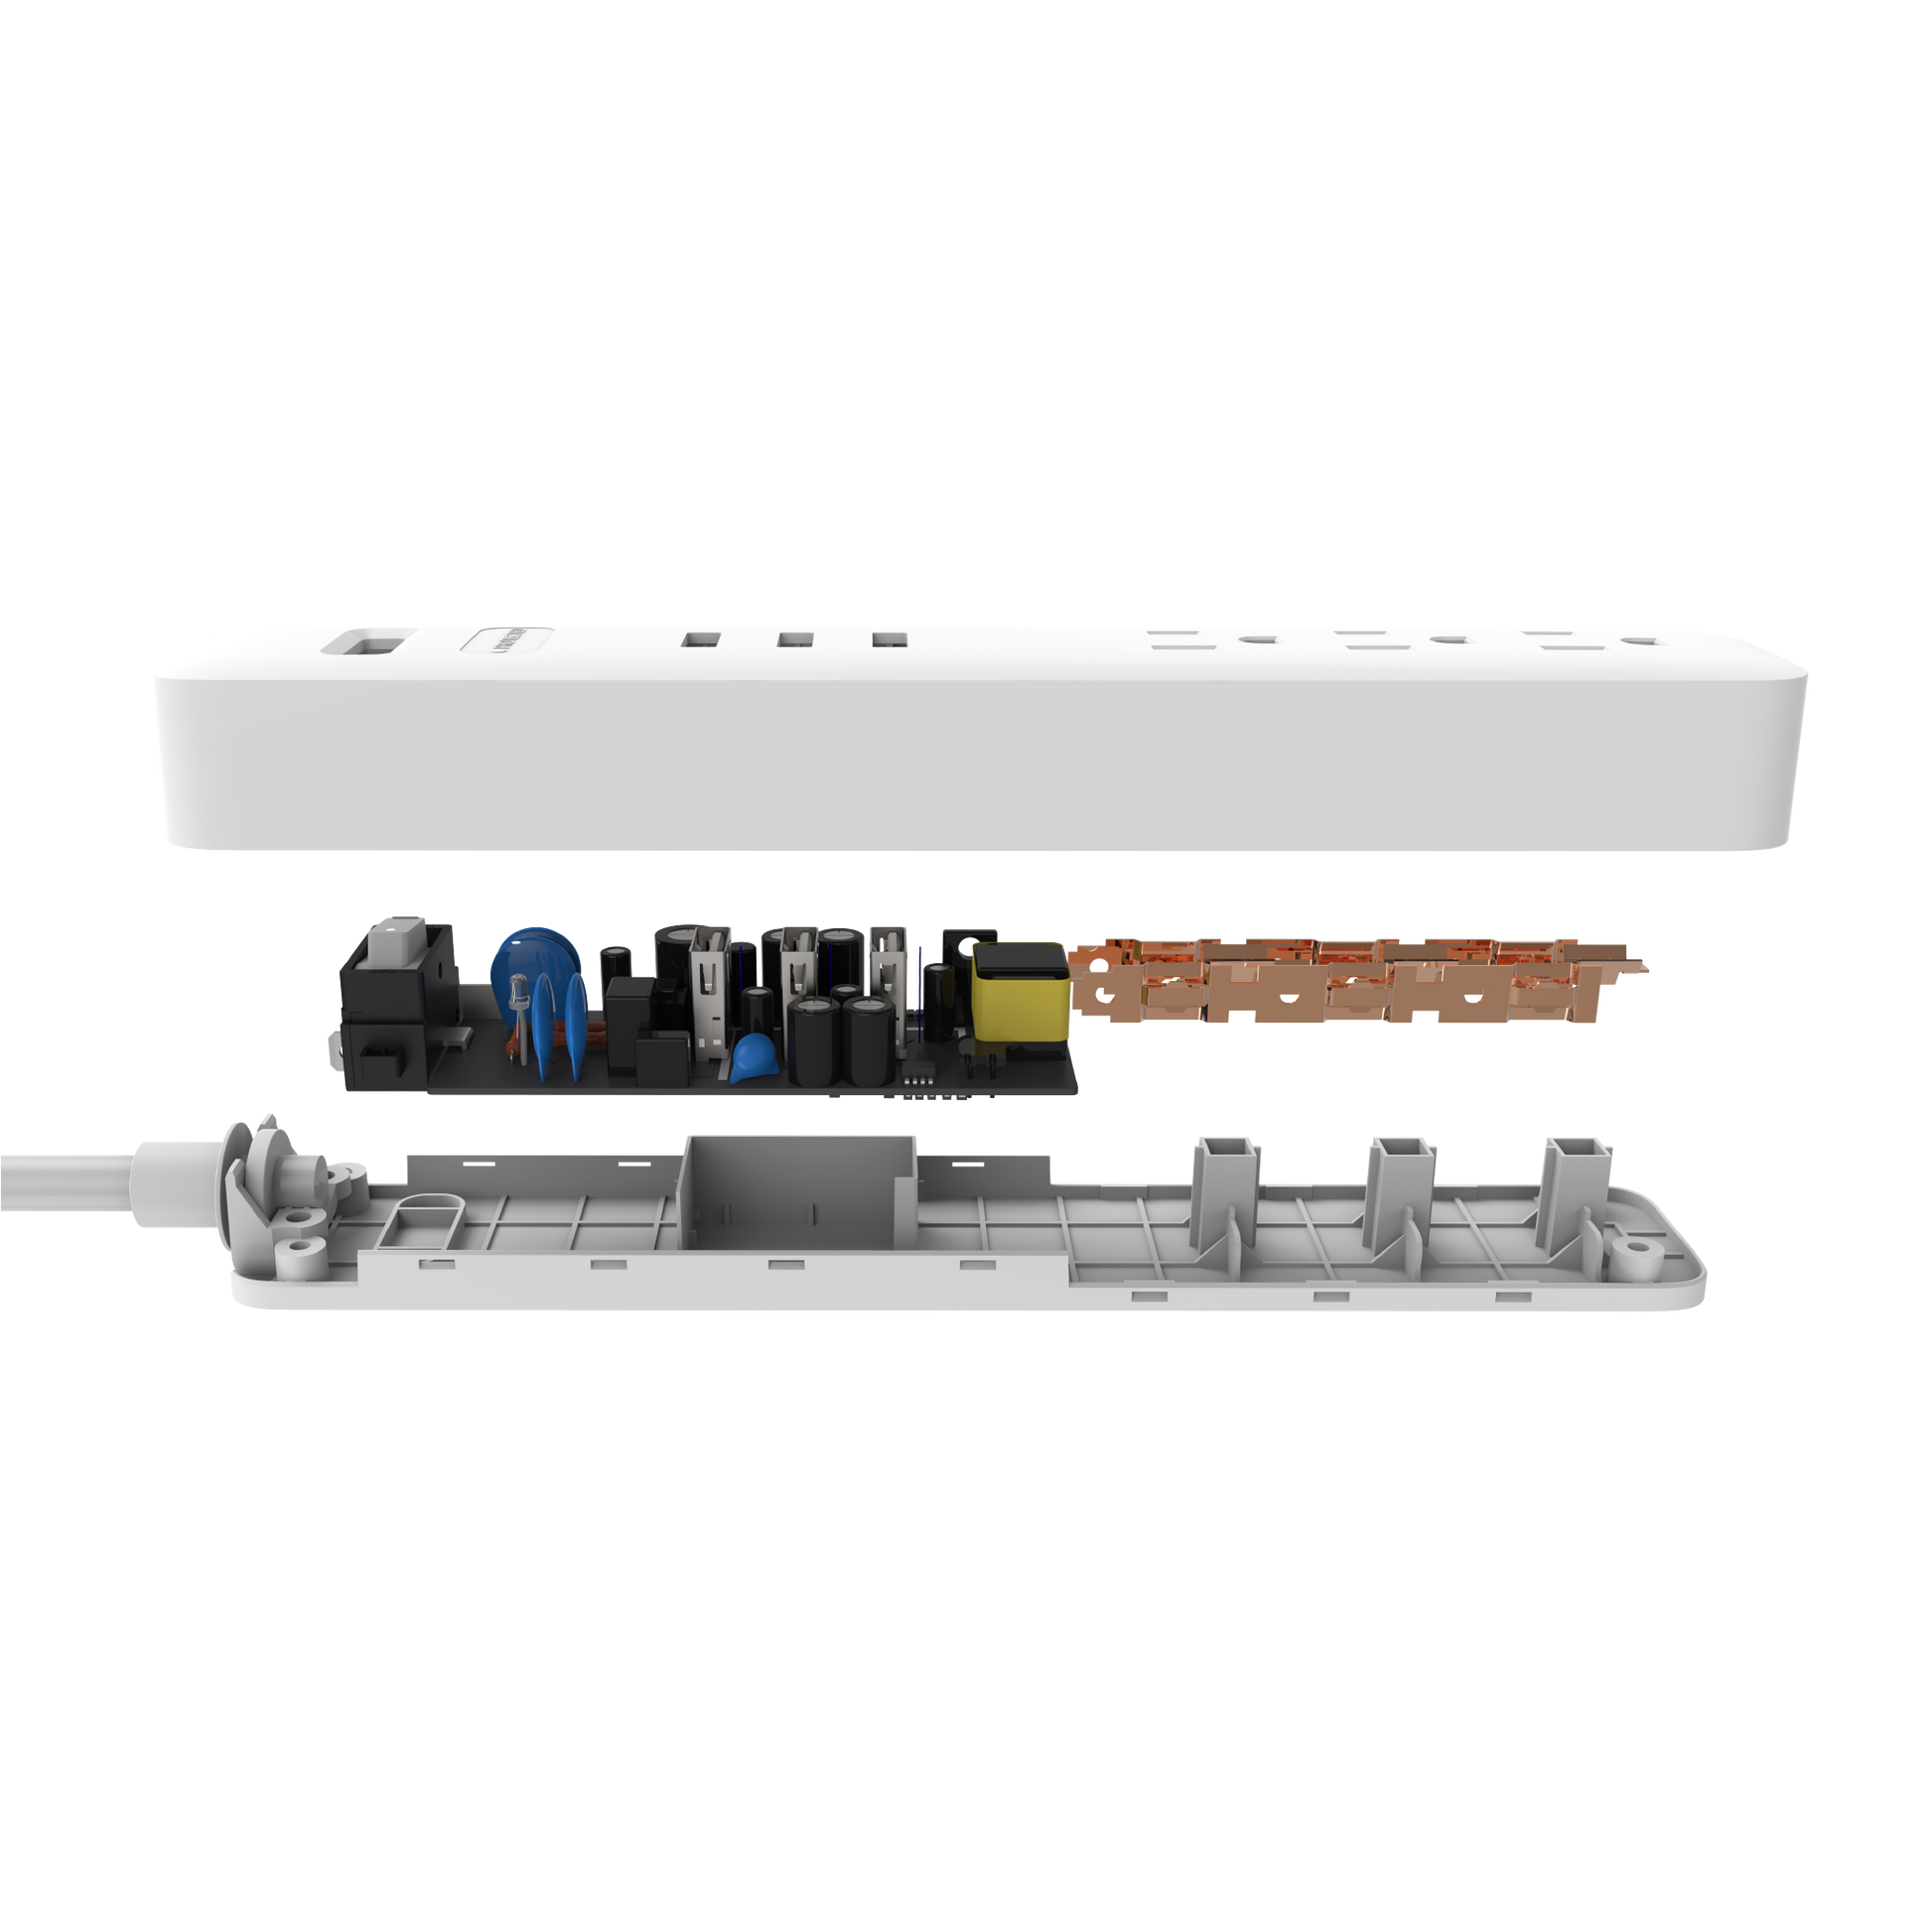 Exploded view of power strip to show the internal components of the product.